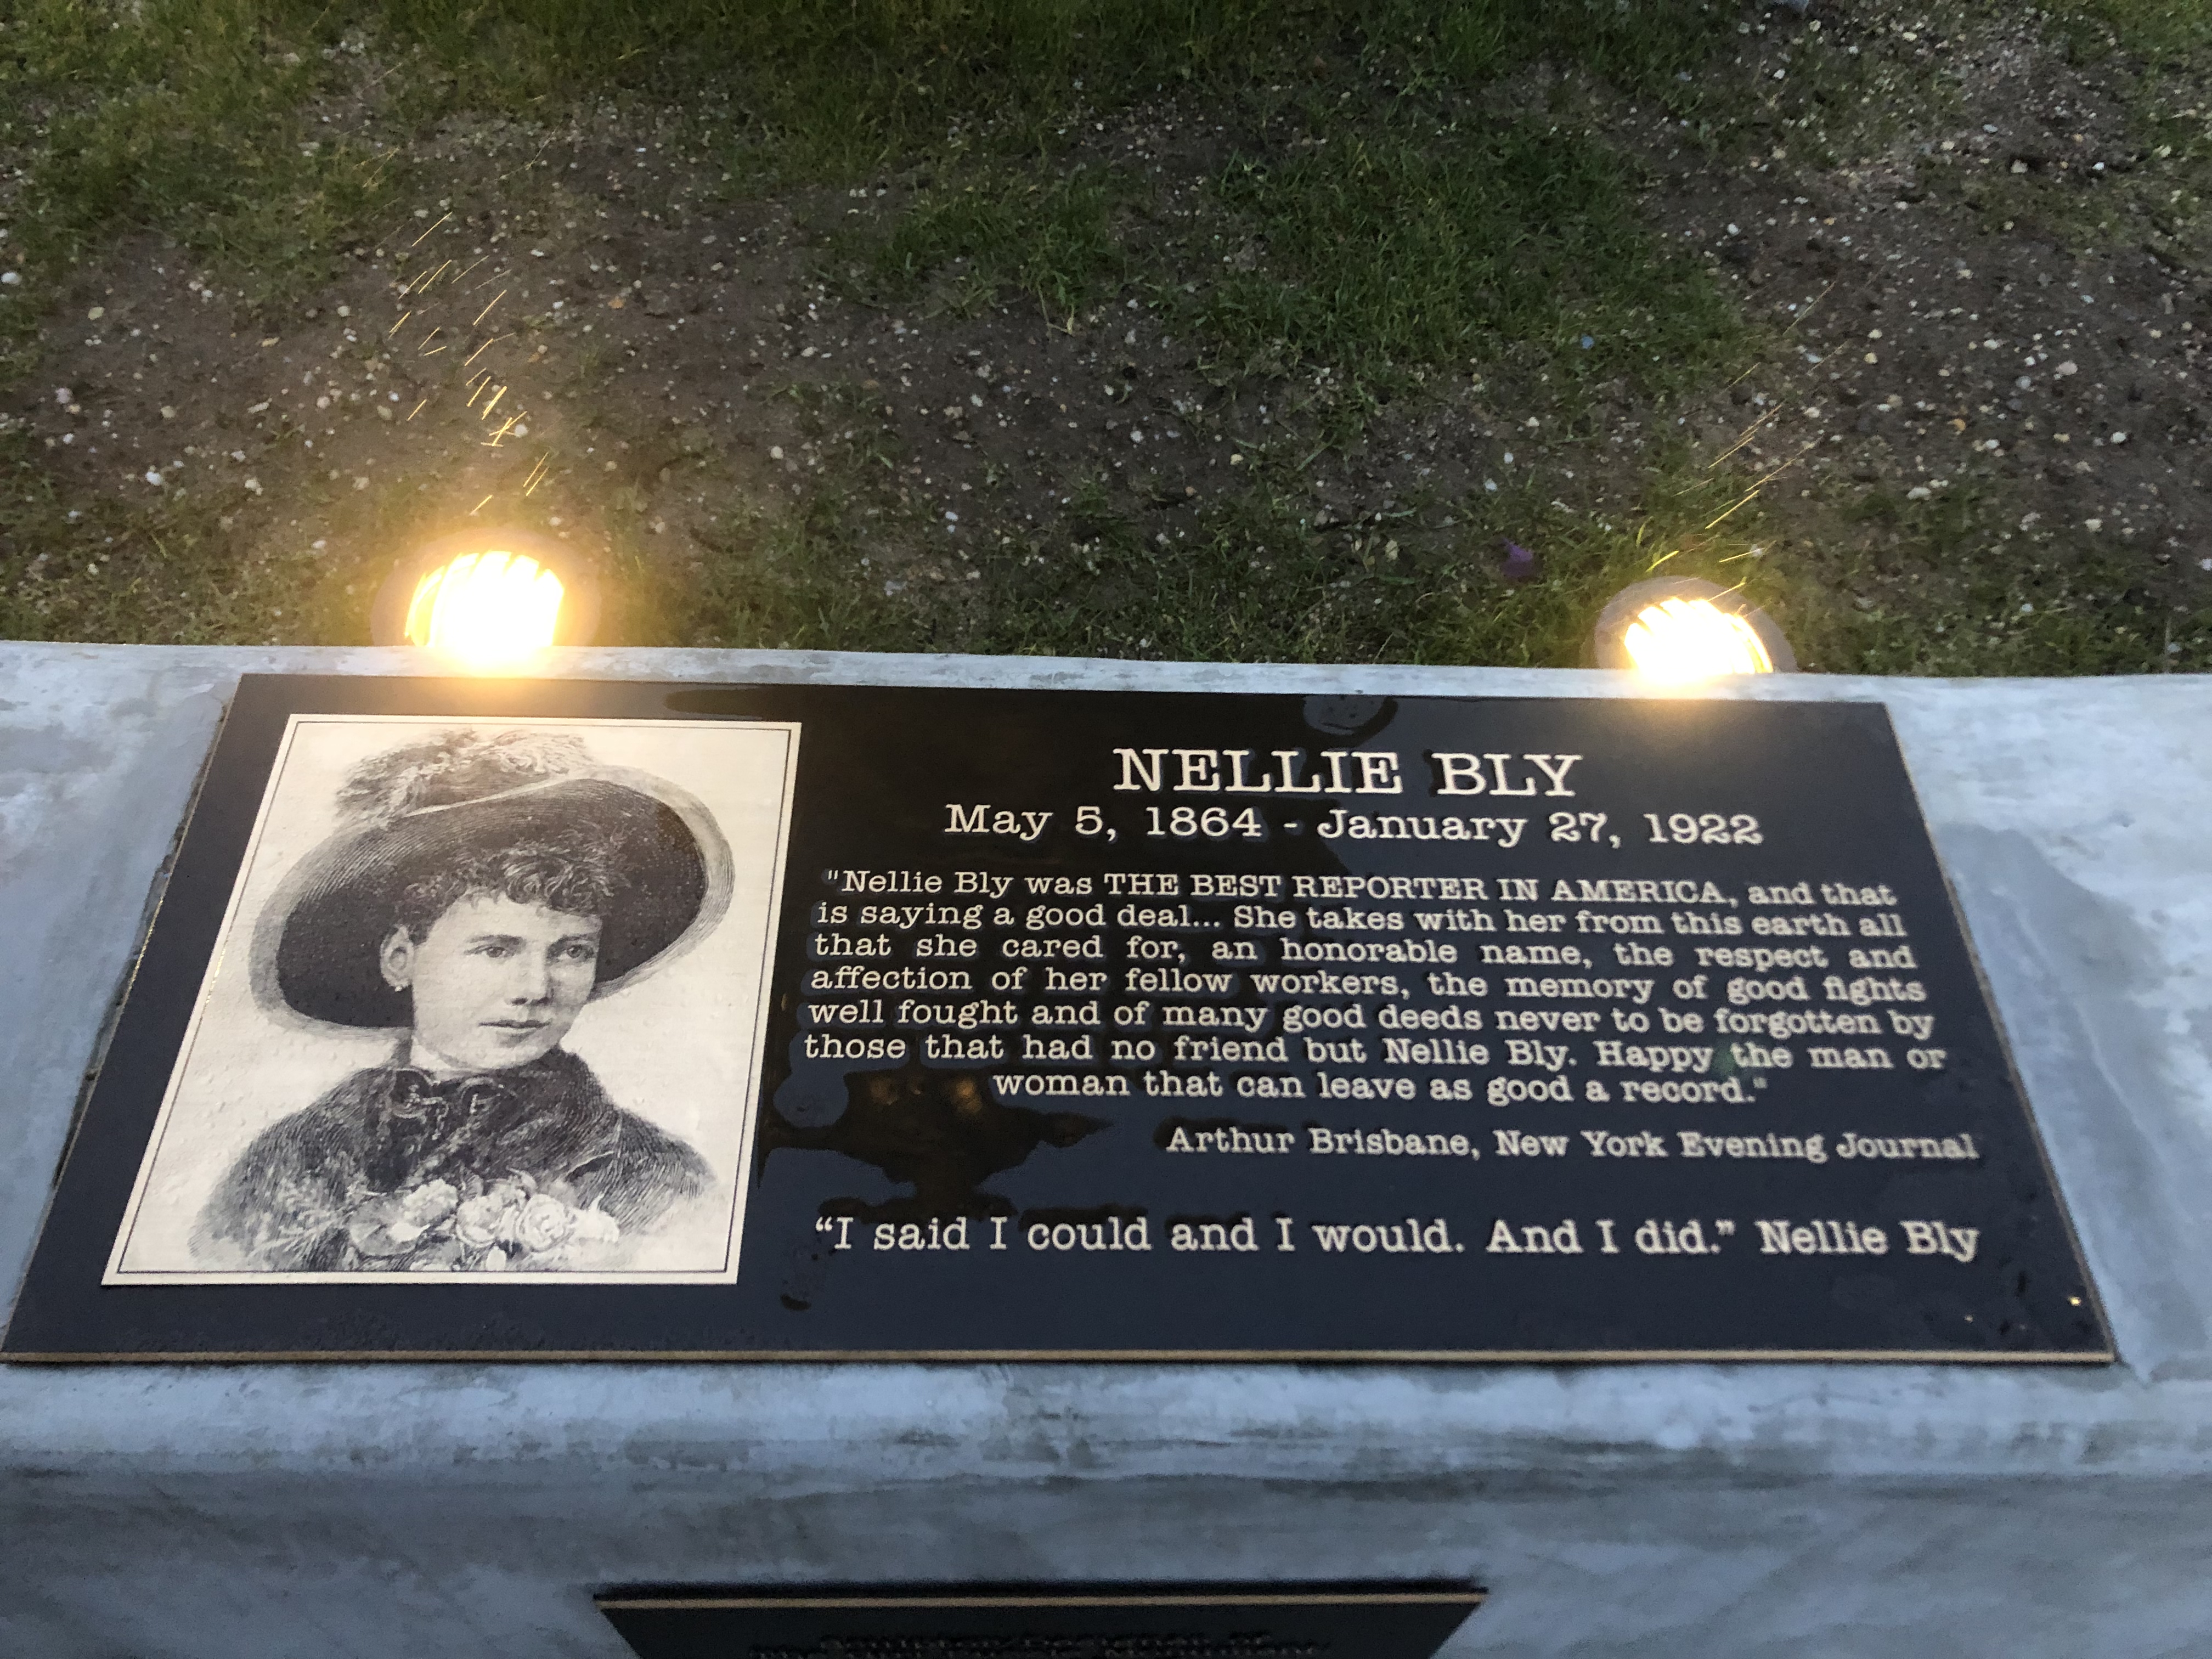 Nellie Bly info at Roosevelt Island